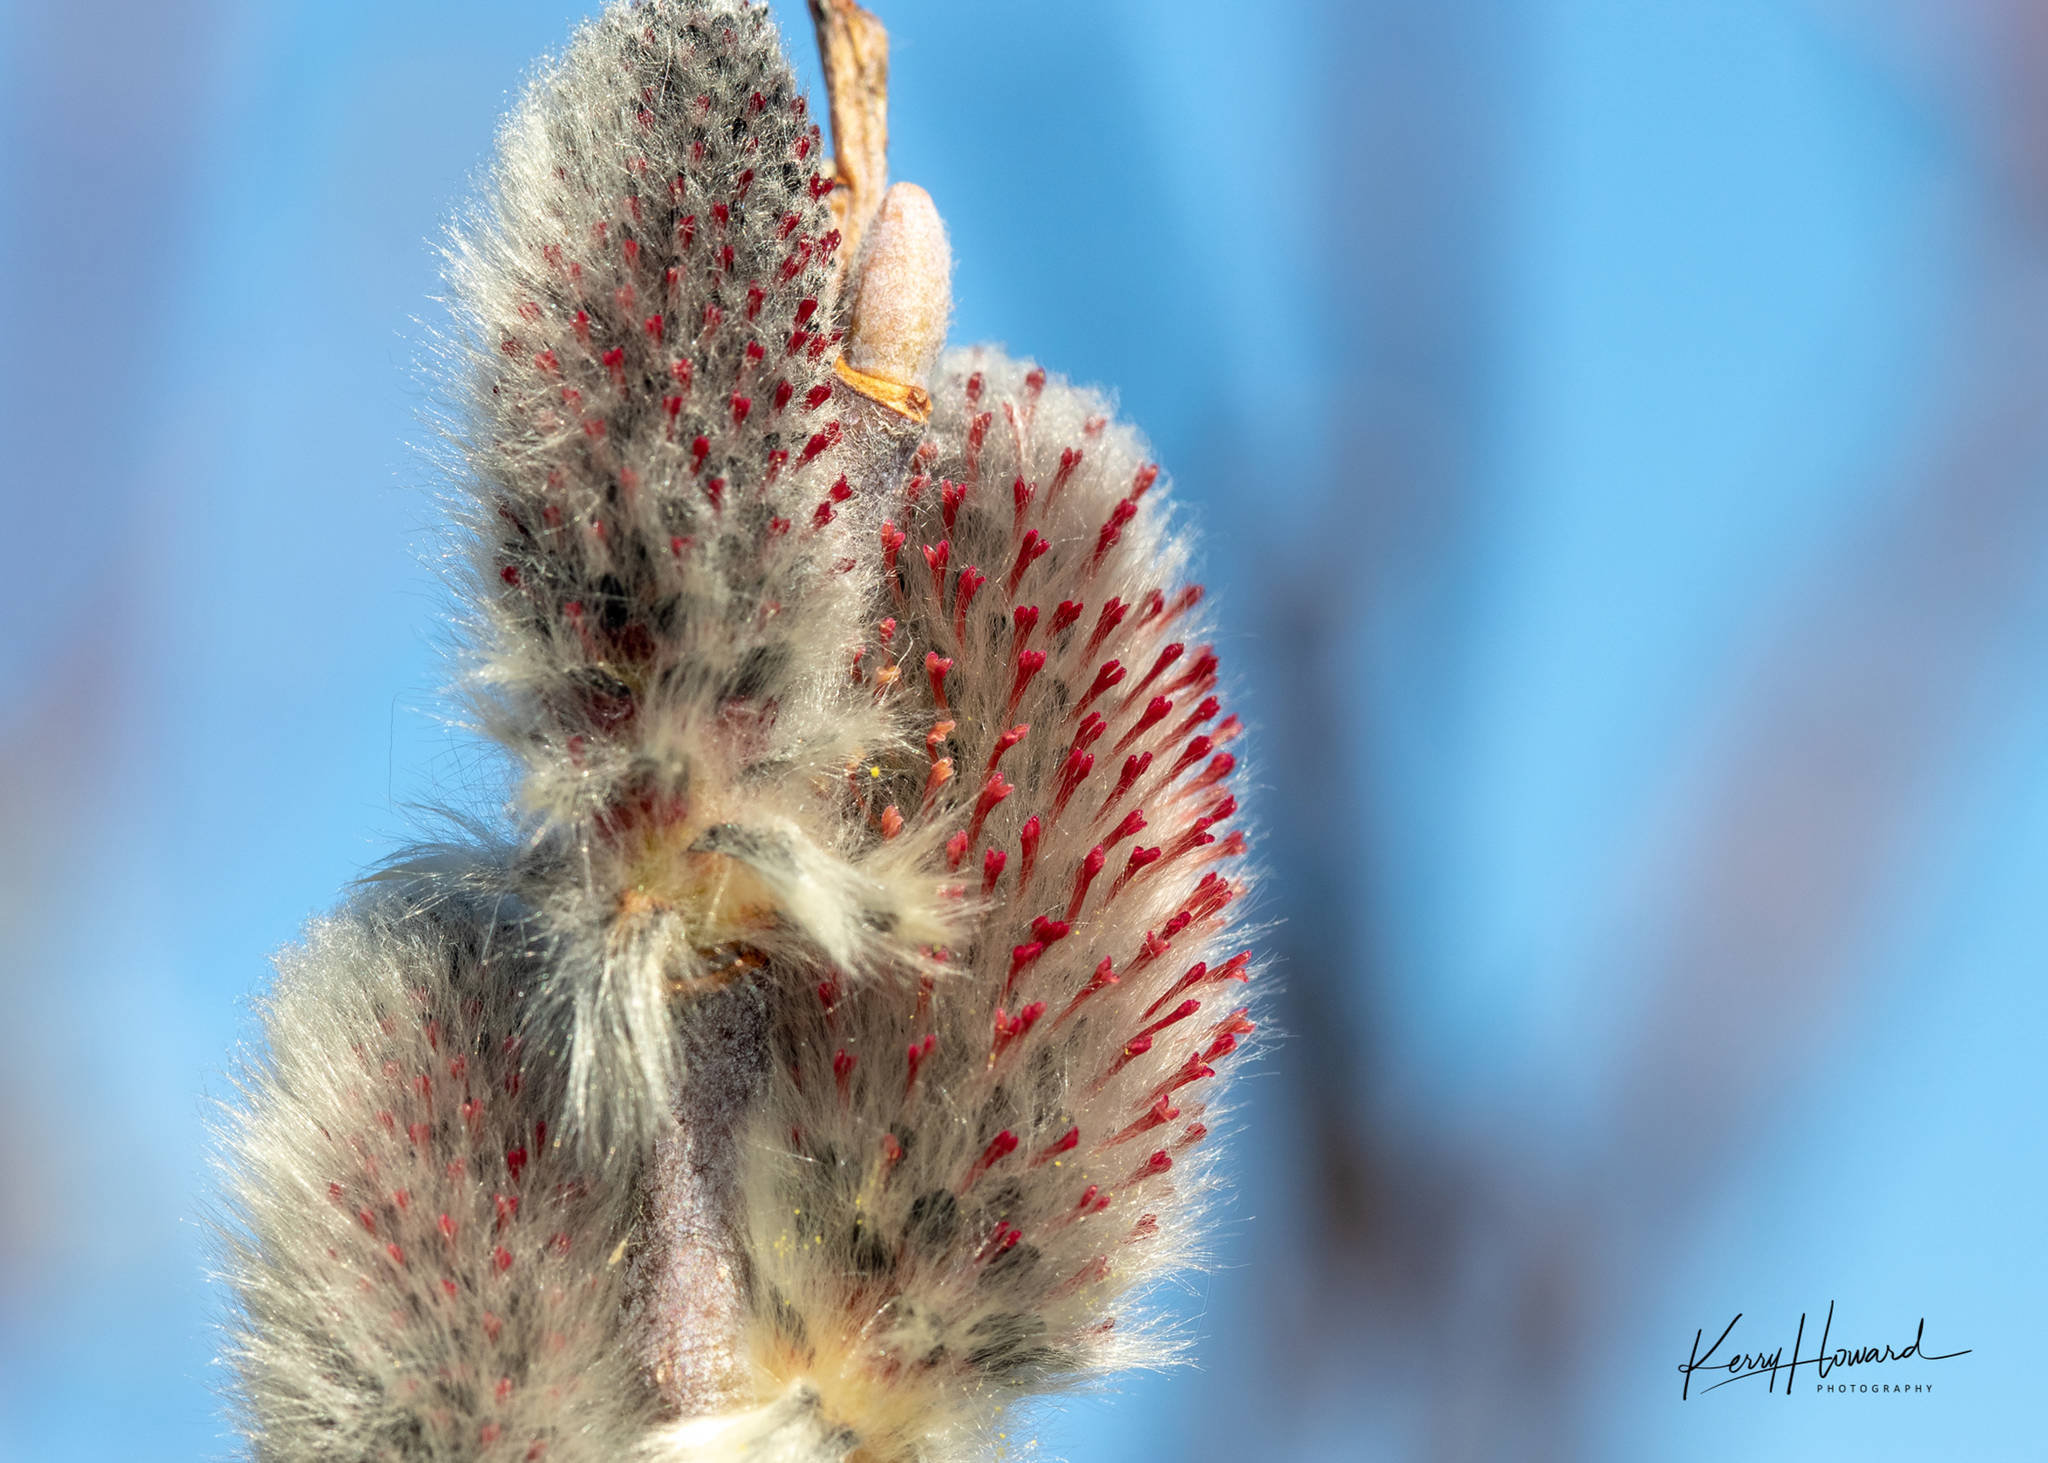 Pussy willows in bloom near the Mendenhall Glacier on March 29, 2019. (Courtesy Photo | Kerry Howard)